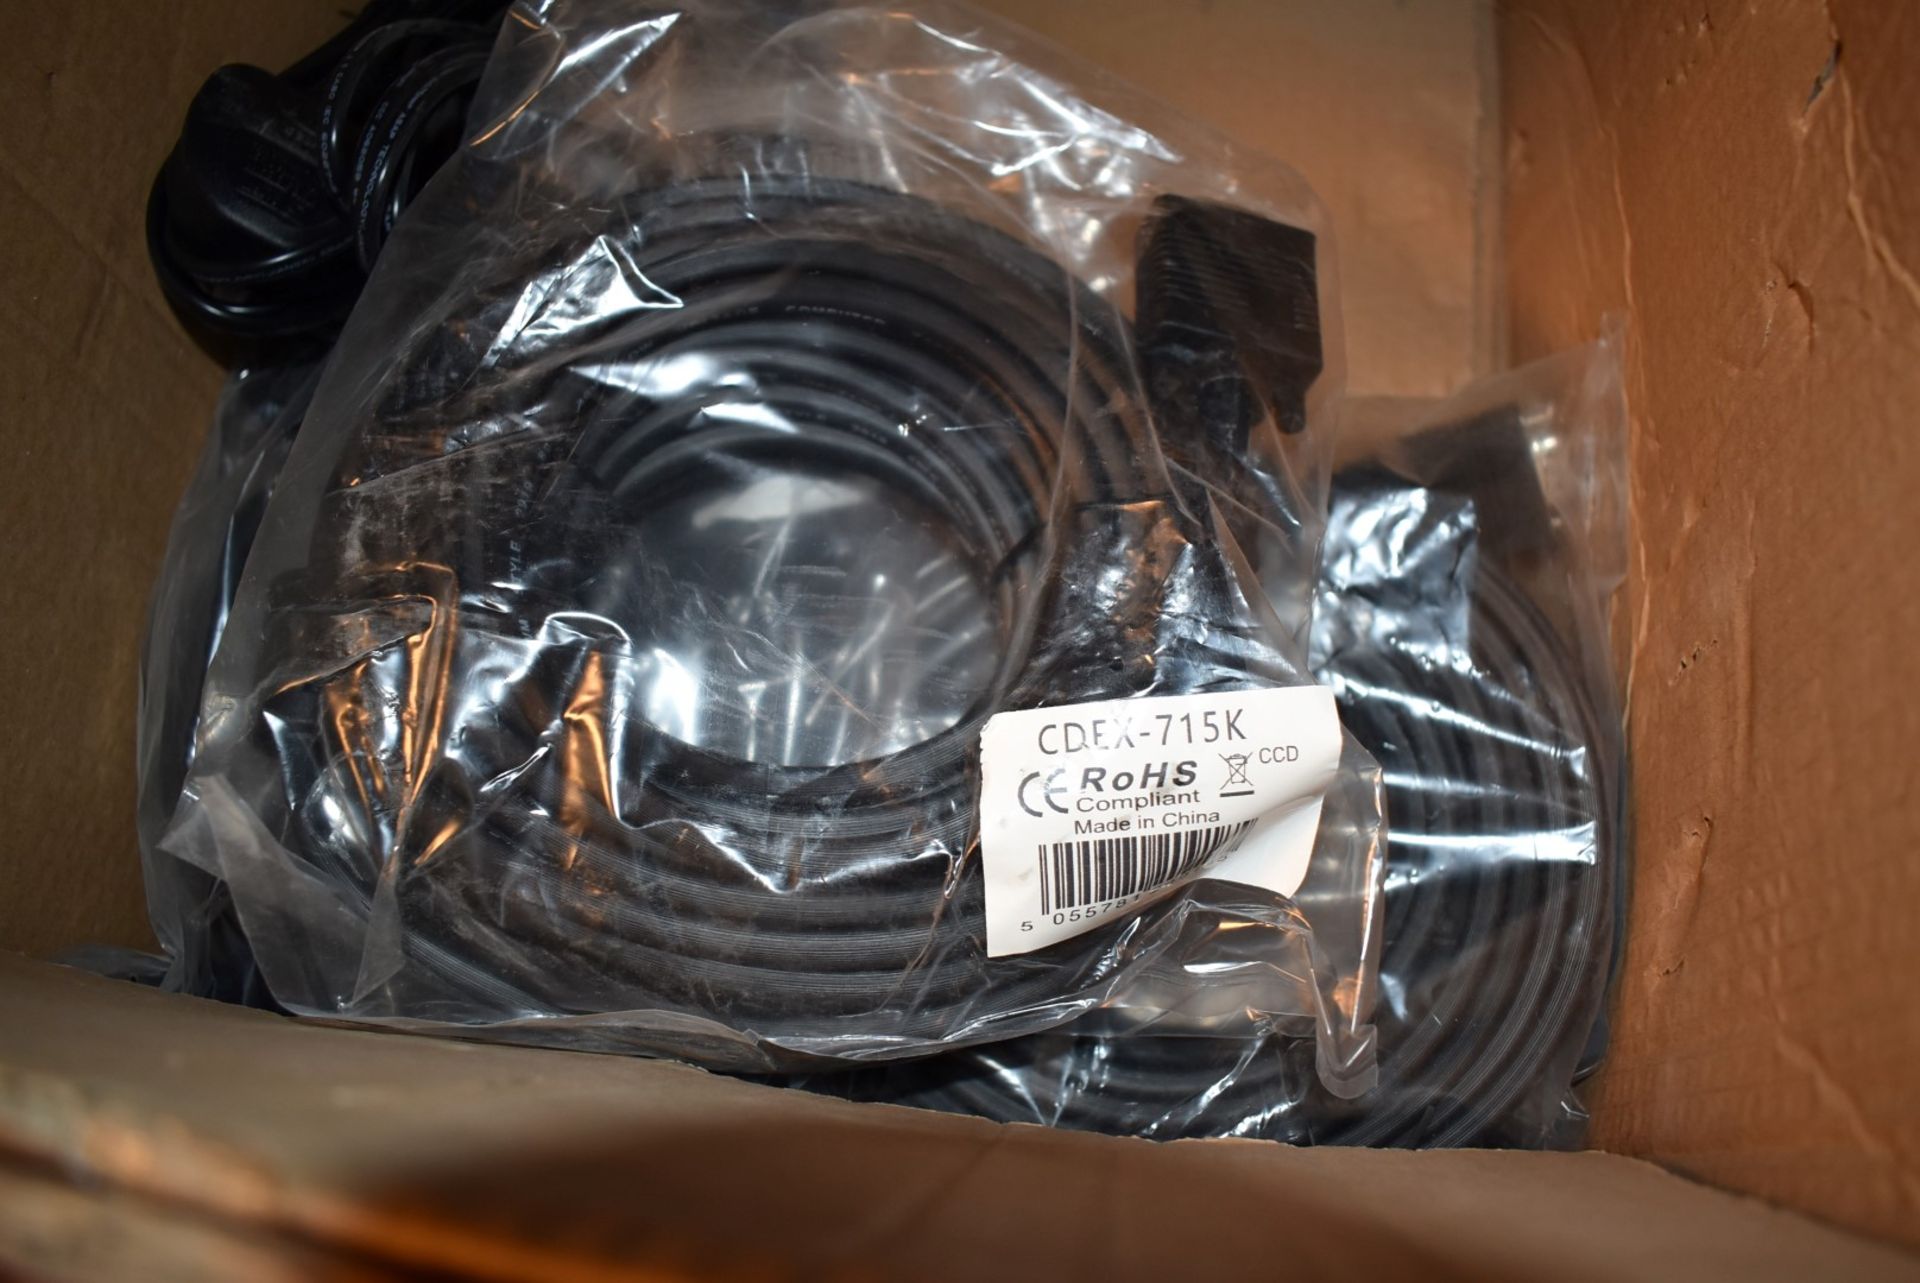 1 x Assorted Job Lot of Various Cables - New Stock in Packets - Ref: AC121 GFMR - CL646 - - Image 5 of 7